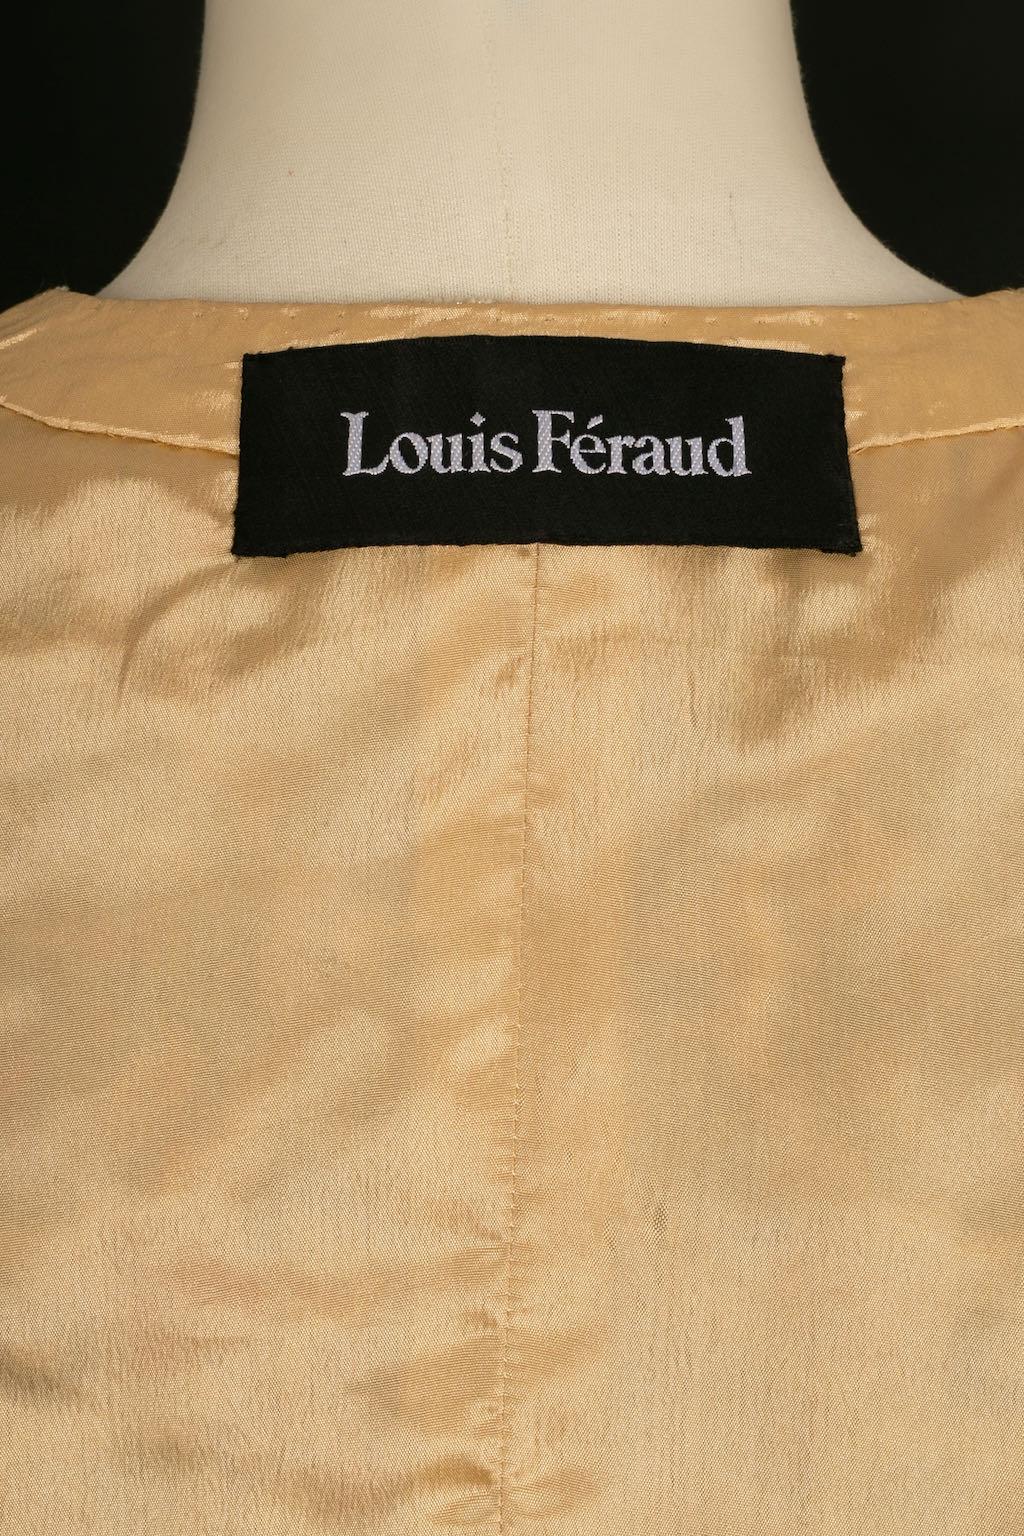 Louis Féraud Haute Couture Embroidered Set, Circa 1990 For Sale 8